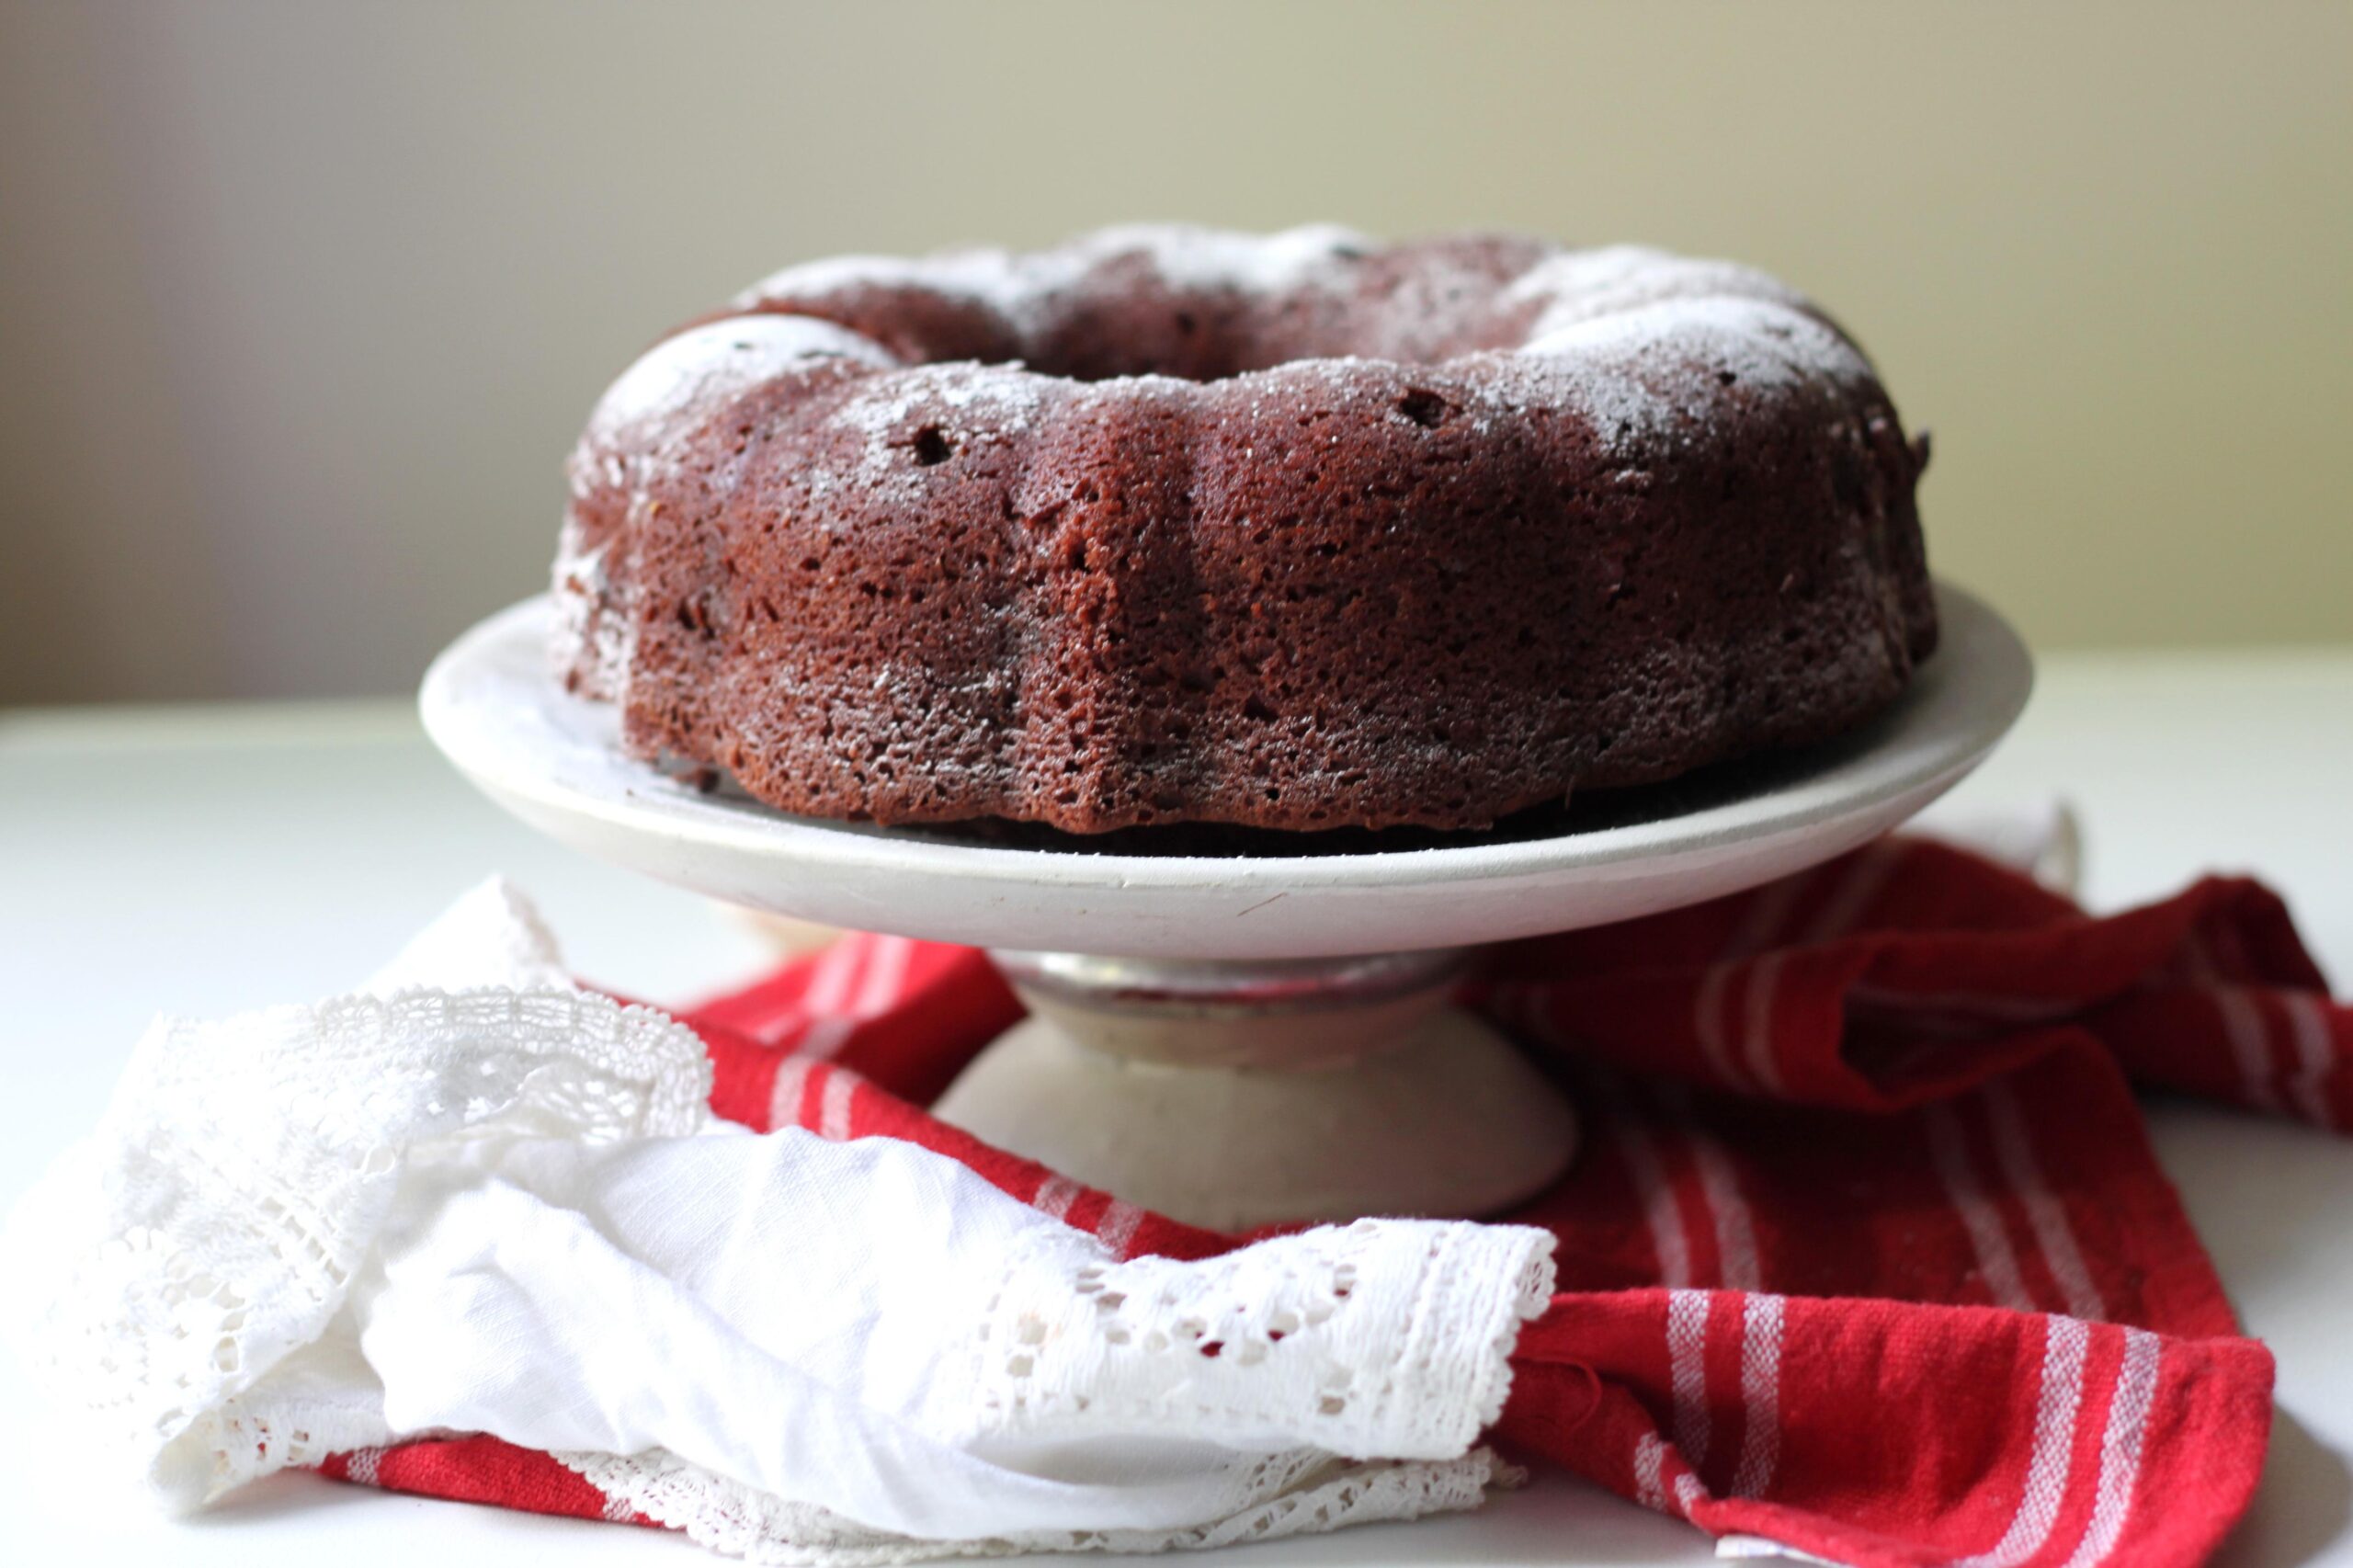  A slice of heaven in every bite, this Red Velvet Pecan Praline Pound Cake is pure decadence!